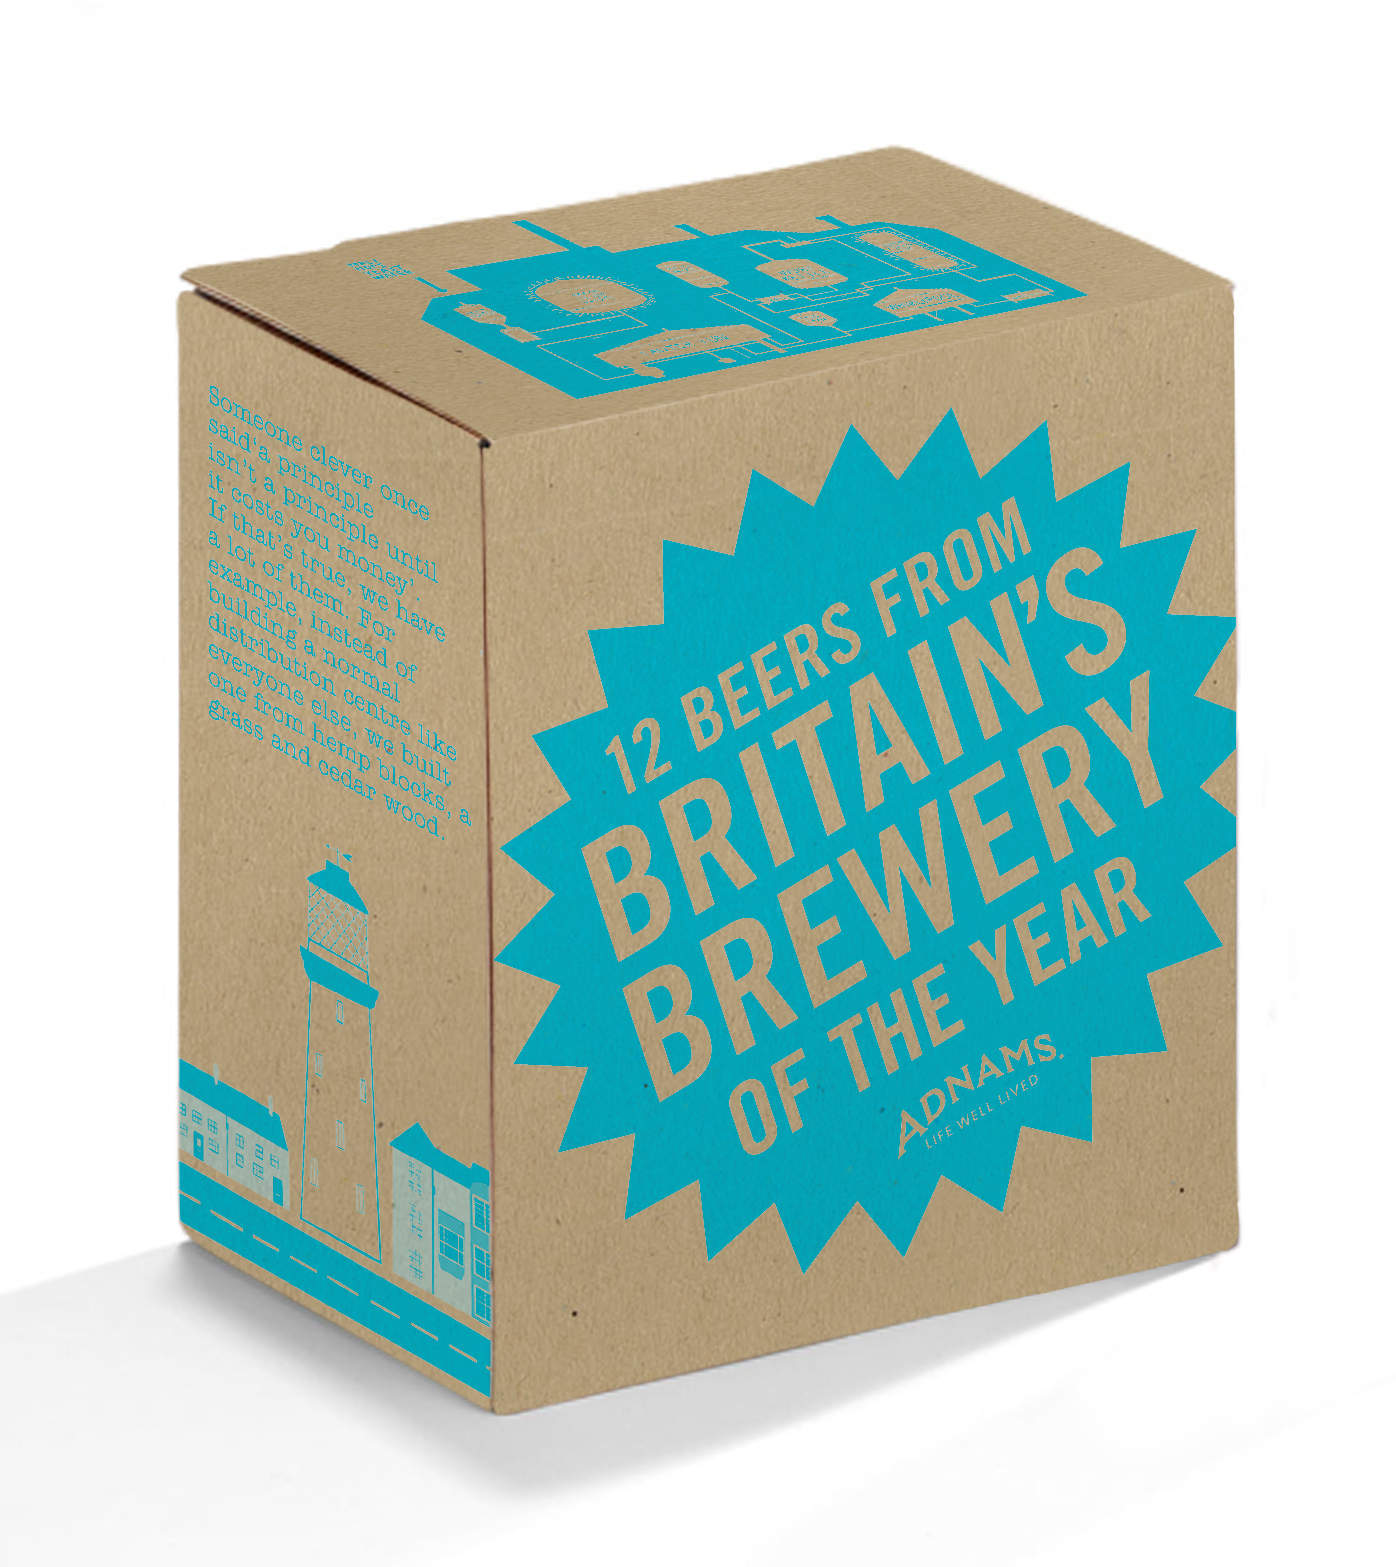 Adnams, 'Brewery Of The Year' Box-01.jpg